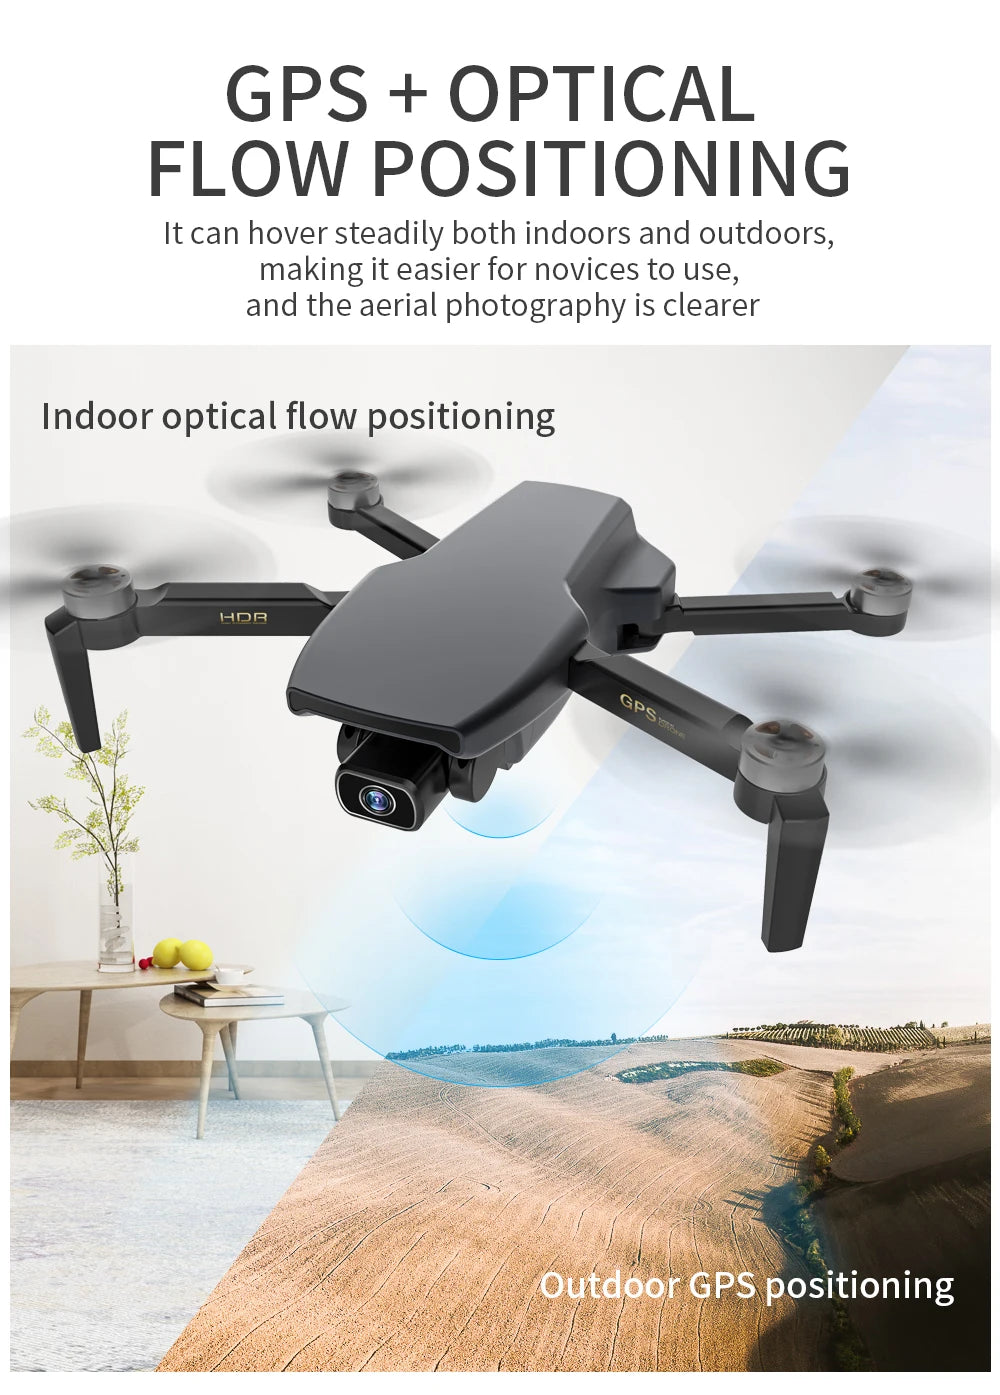 ZLRC SG108 Drone, GPS + OPTICAL FLOW POSITIONING It can hover steadily both indoor